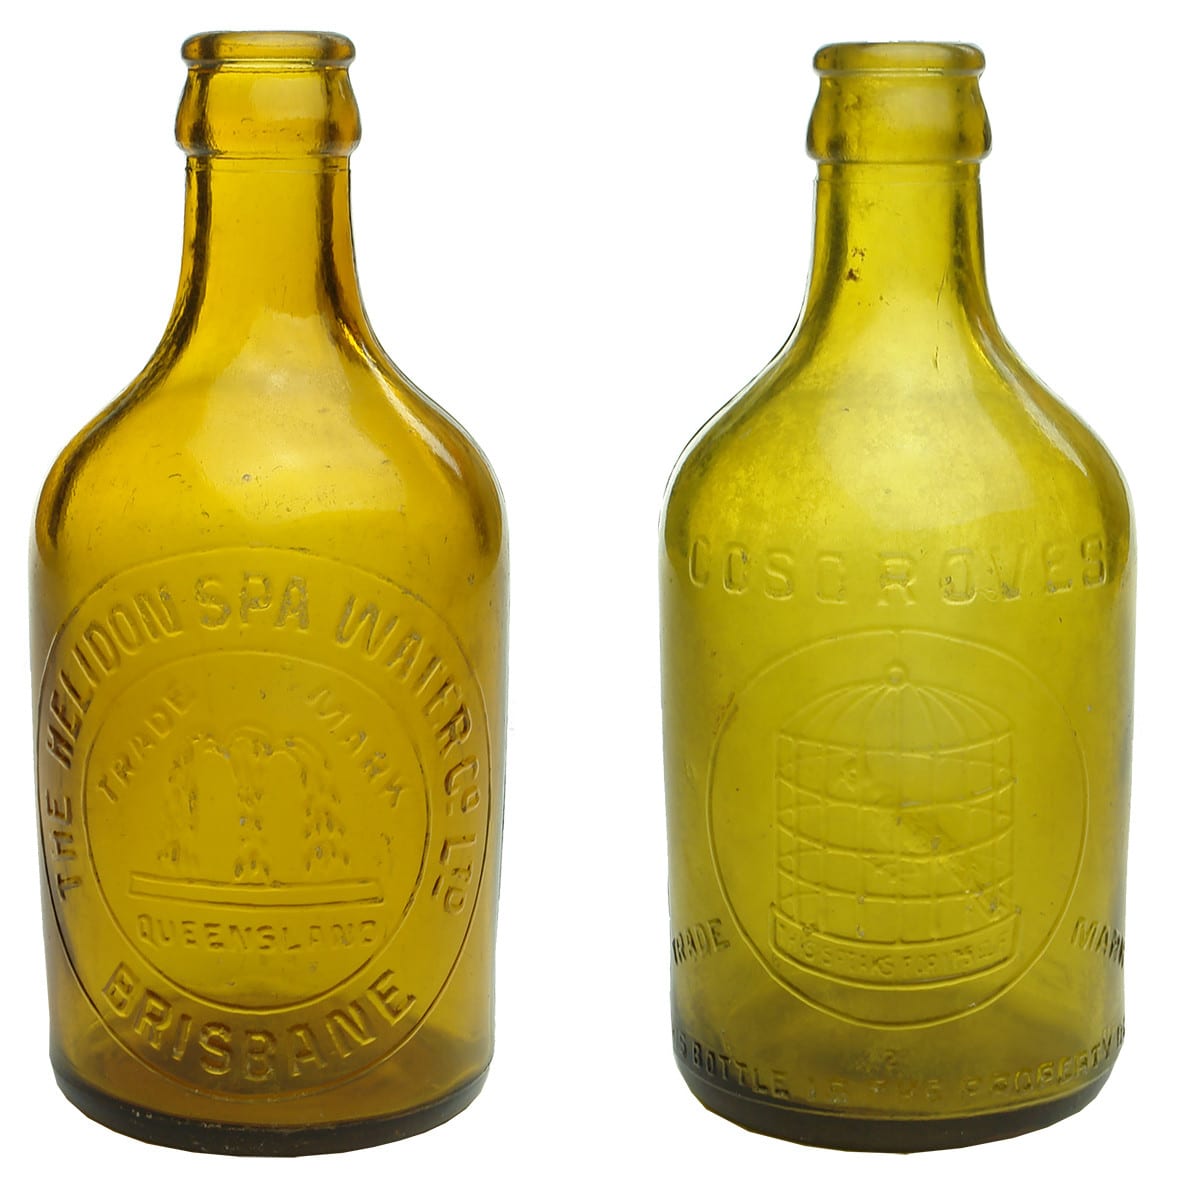 2 Crown Seal Glass Ginger Beers. Helidon Spa Water Co Ltd, Brisbane. Fountain; Cosgroves, Brisbane. Parrot in Cage. Yellow Amber. (Queensland)